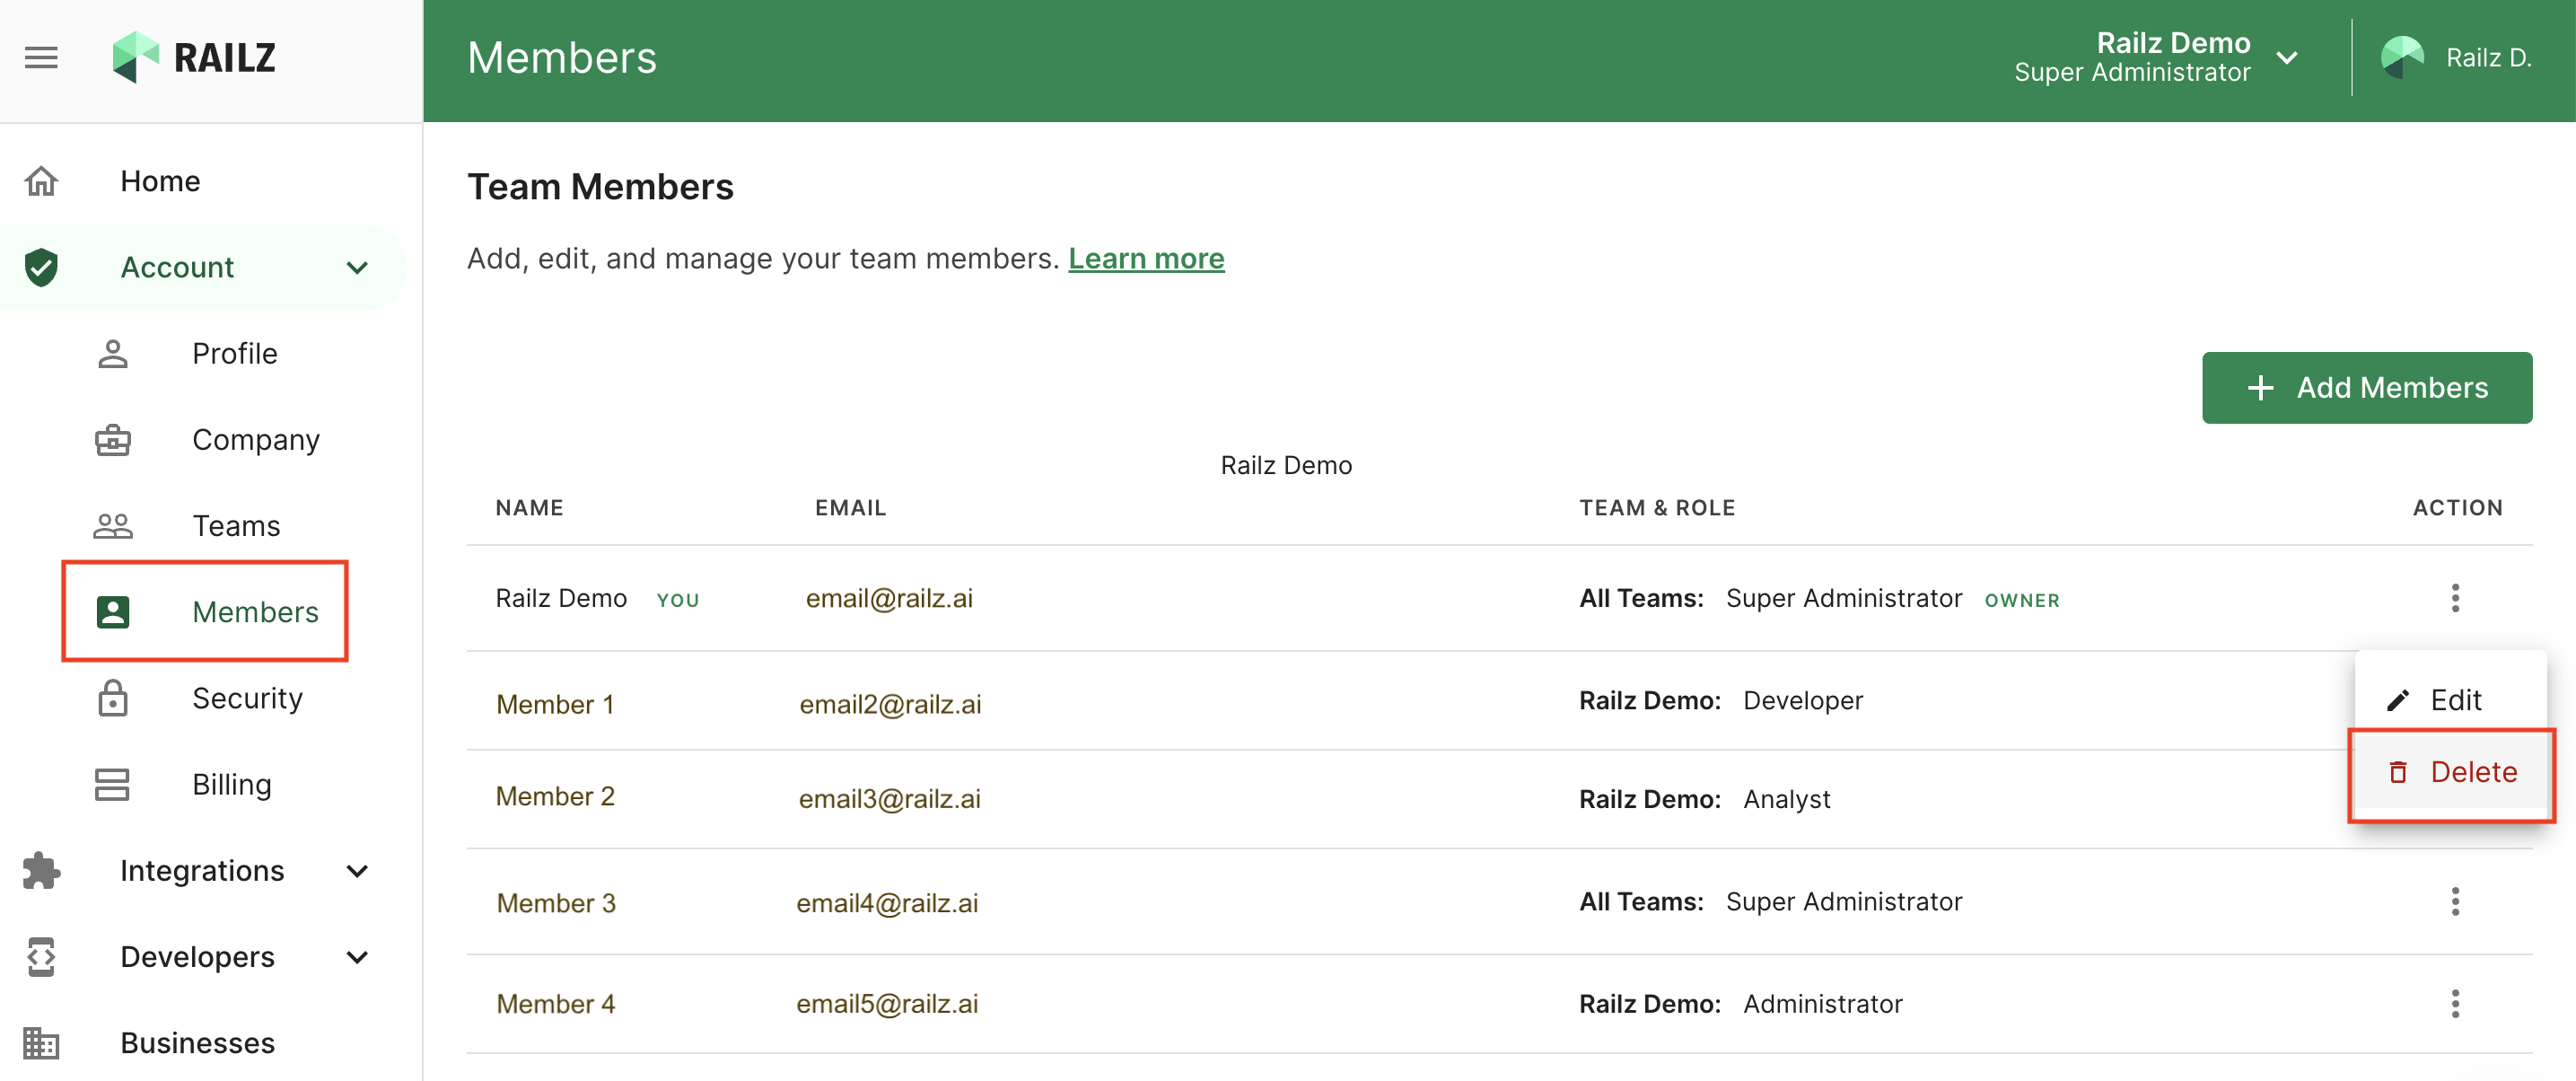 Manage team page in Railz Dashboard. Click to Expand.

